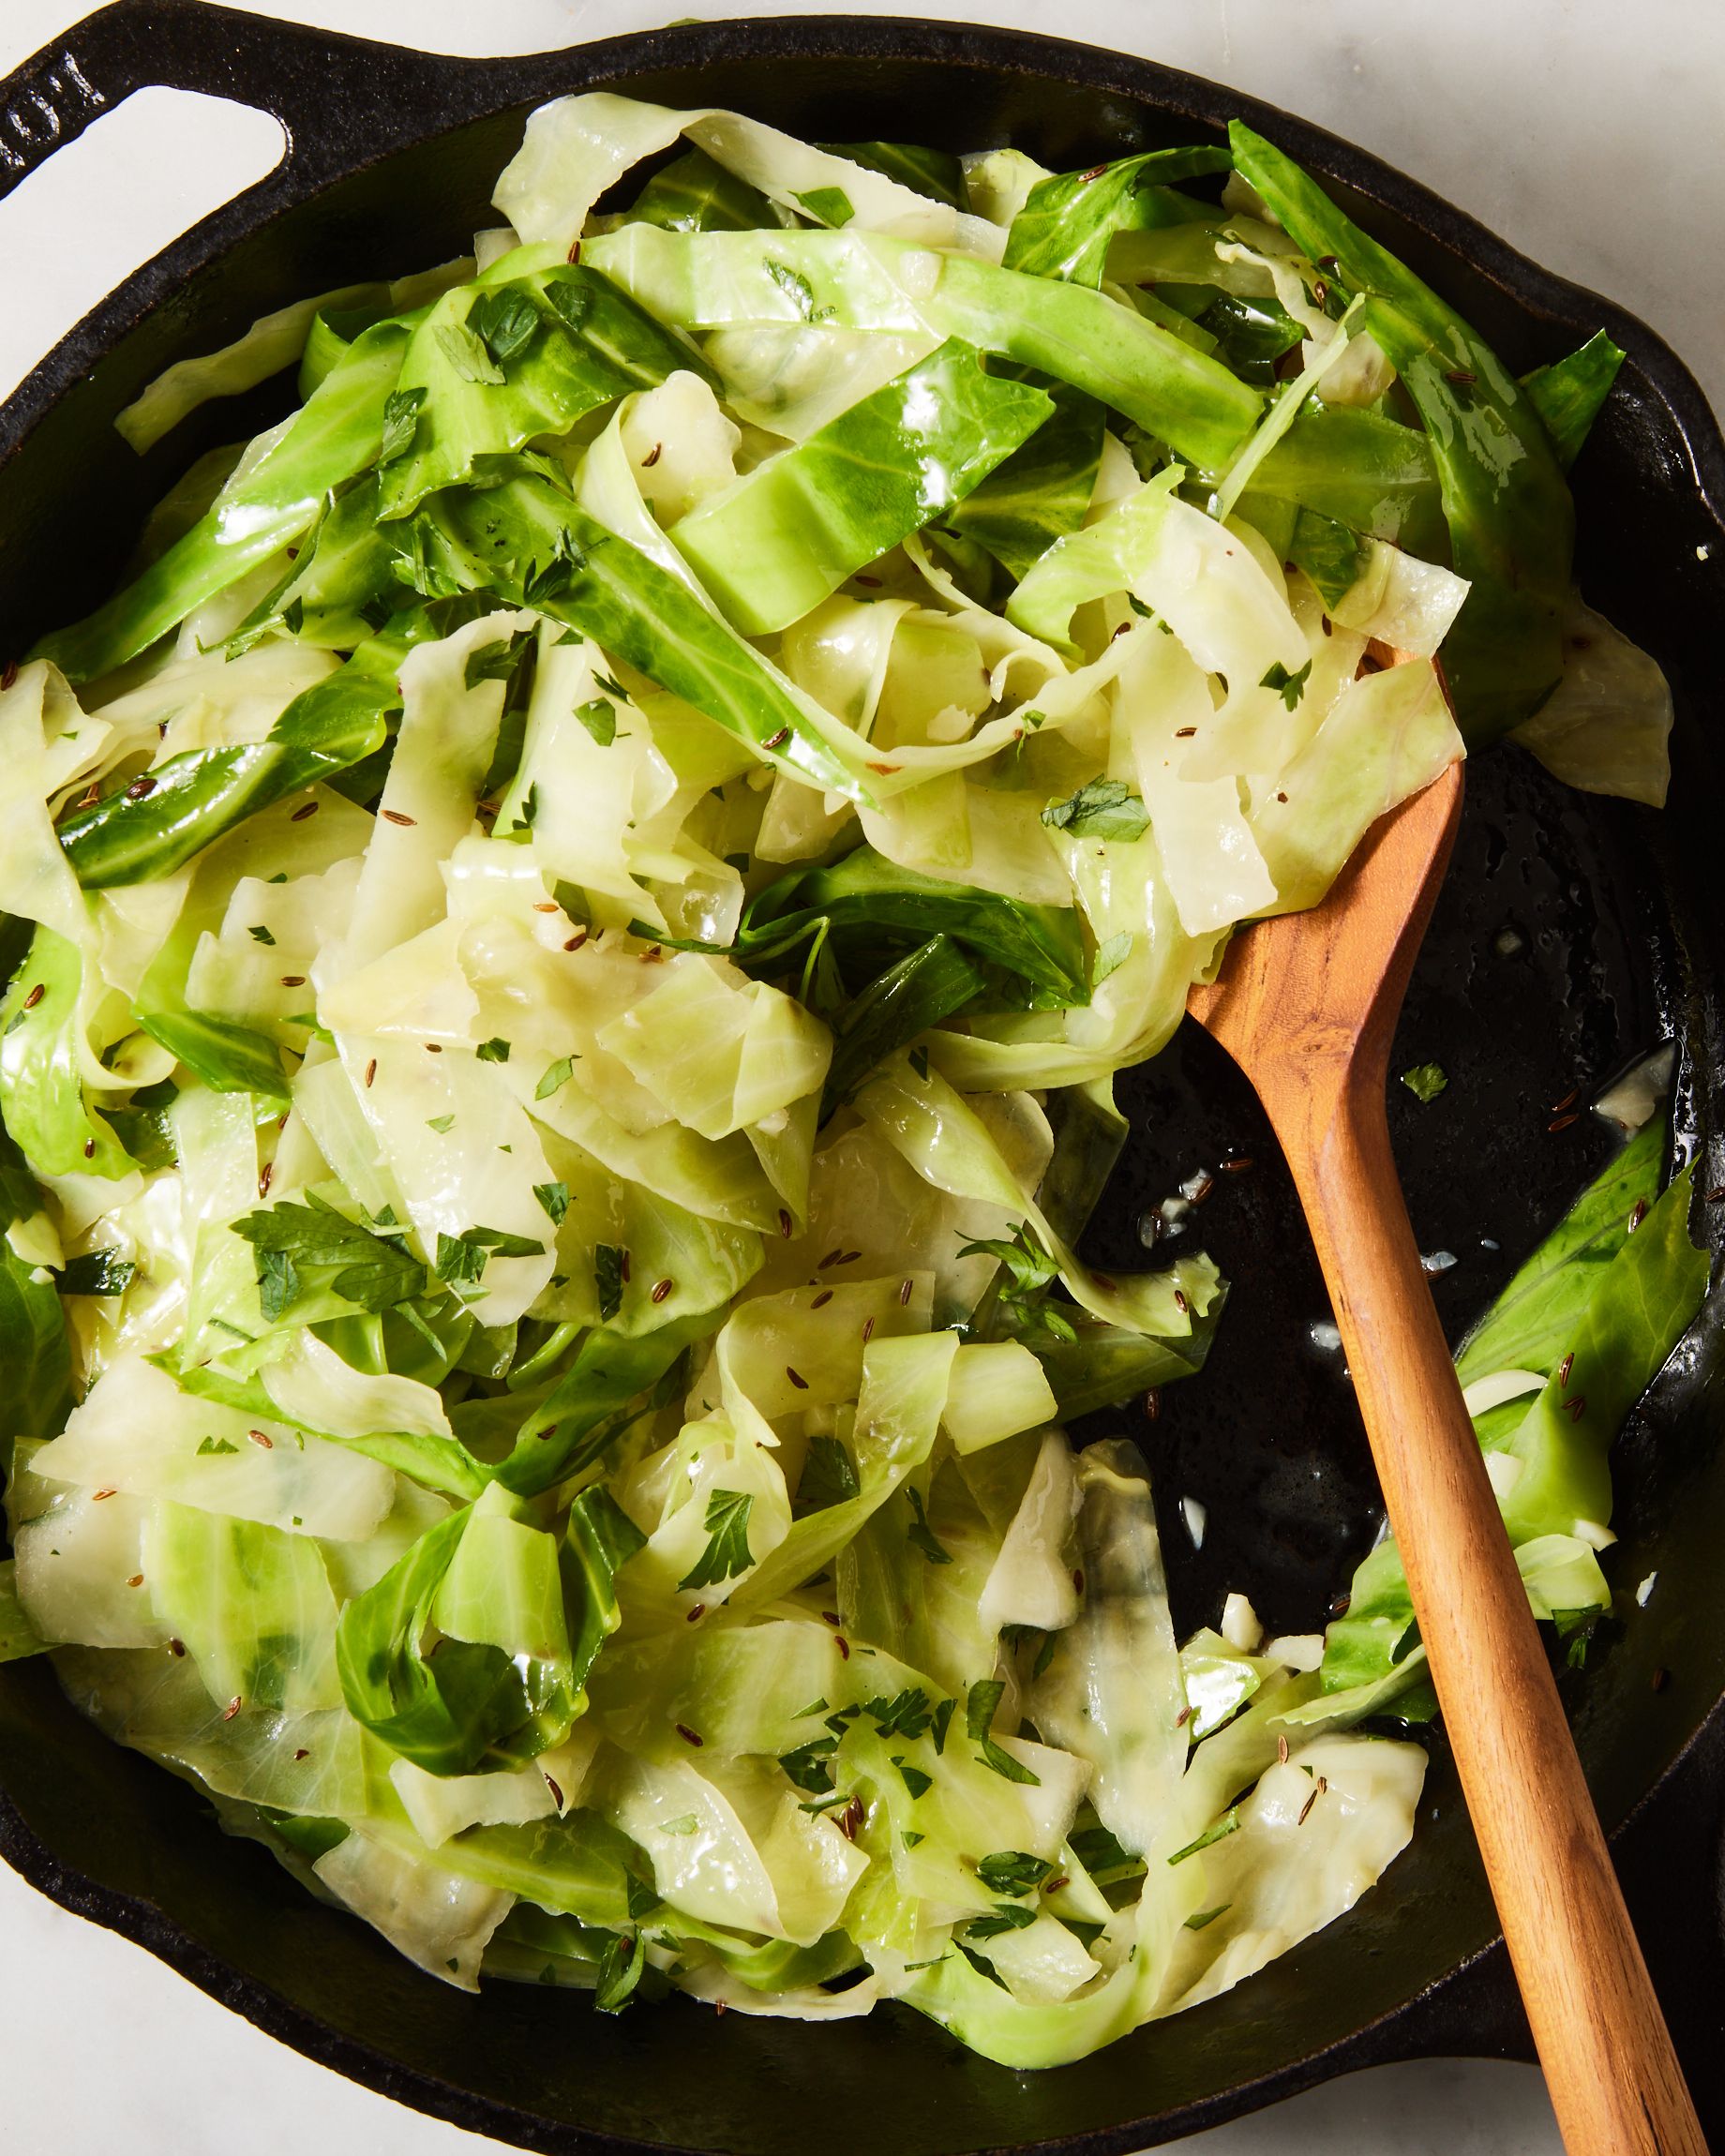 Sautéed Cabbage - A Quick and Simple Irish Side Dish